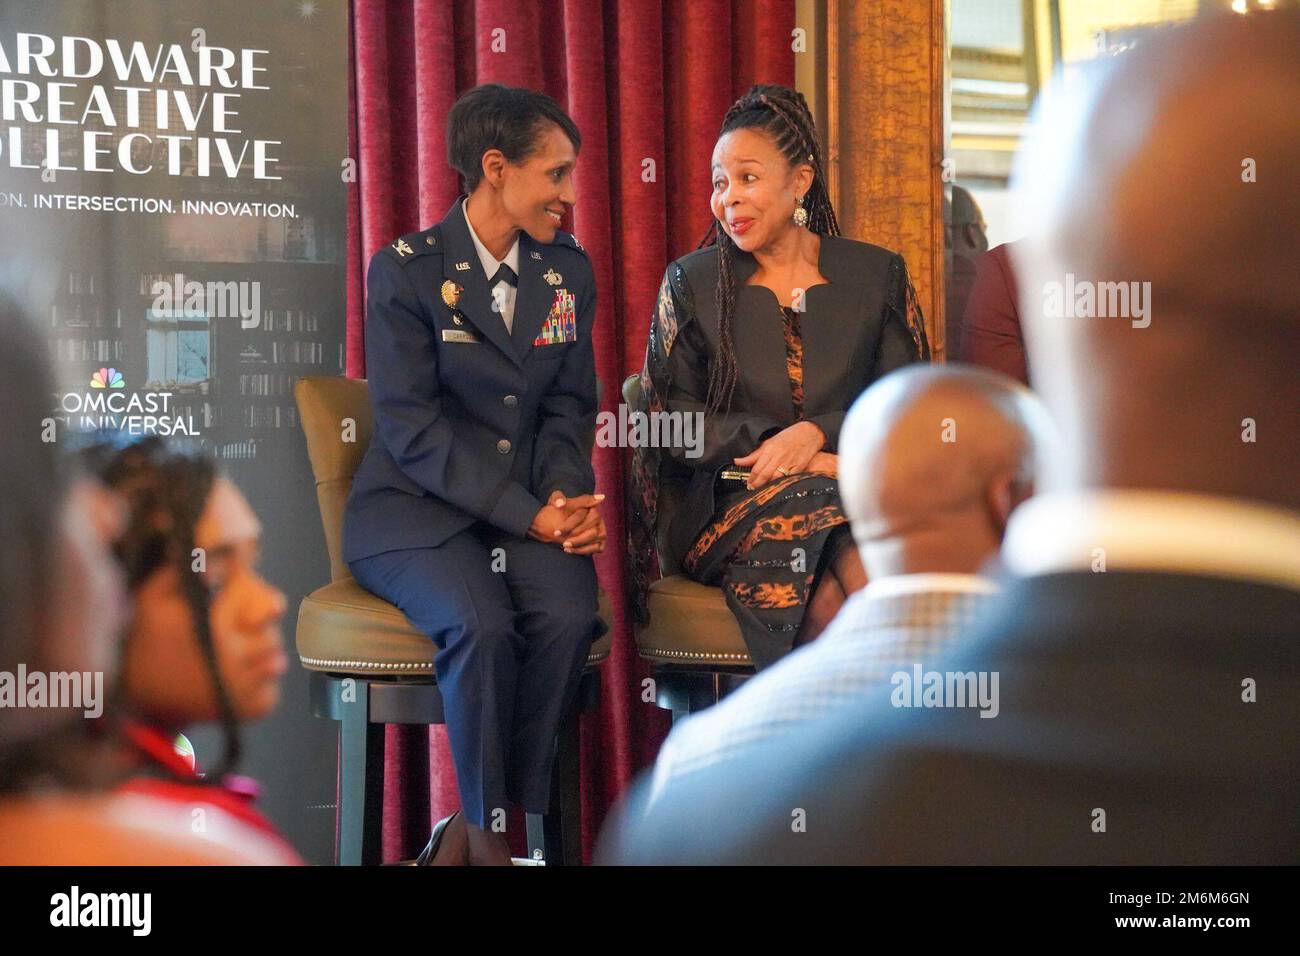 Hardware Creative Collective honorees Col. Jenise Carroll, 75th Air Base Wing commander, and Dr. Jackie Thompson, assistant superintendent for Davis County schools, speak at the Hardware Creative Collective event April 28, 2022, in Salt Lake City, Utah. The inaugural event honored seven “Black Creatives” who have made a significant impact in building inclusive communities across Utah’s landscape and featured Black leaders in the arts, education, fashion, film, health, government, venture, and tech. Stock Photo